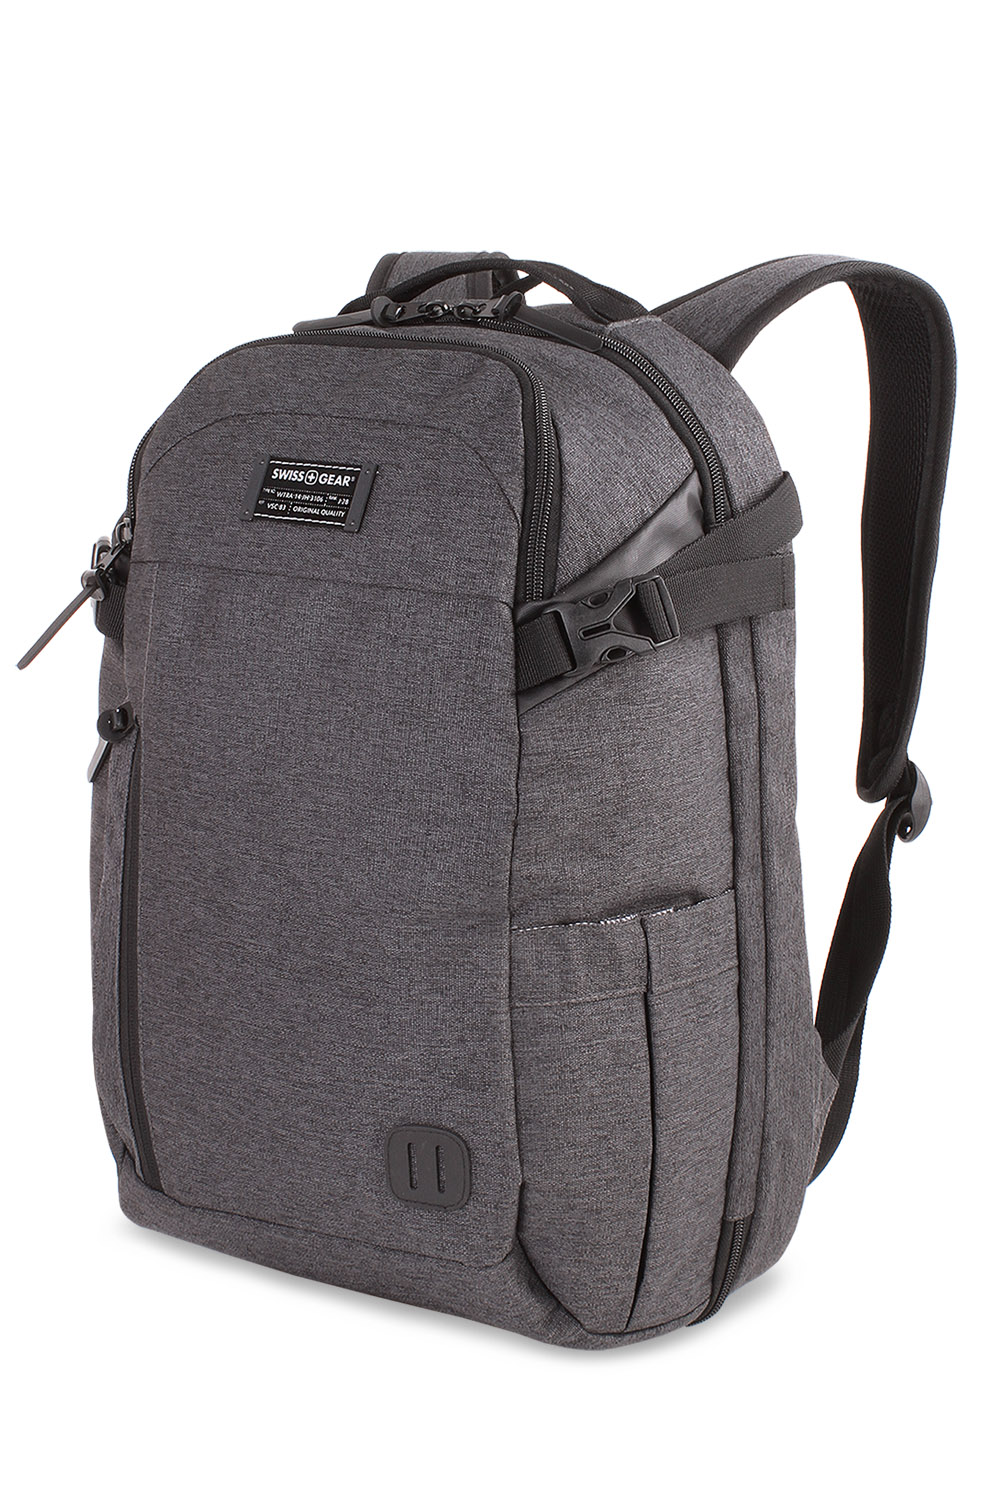 brand new backpack daypack GT12005 5 colors 